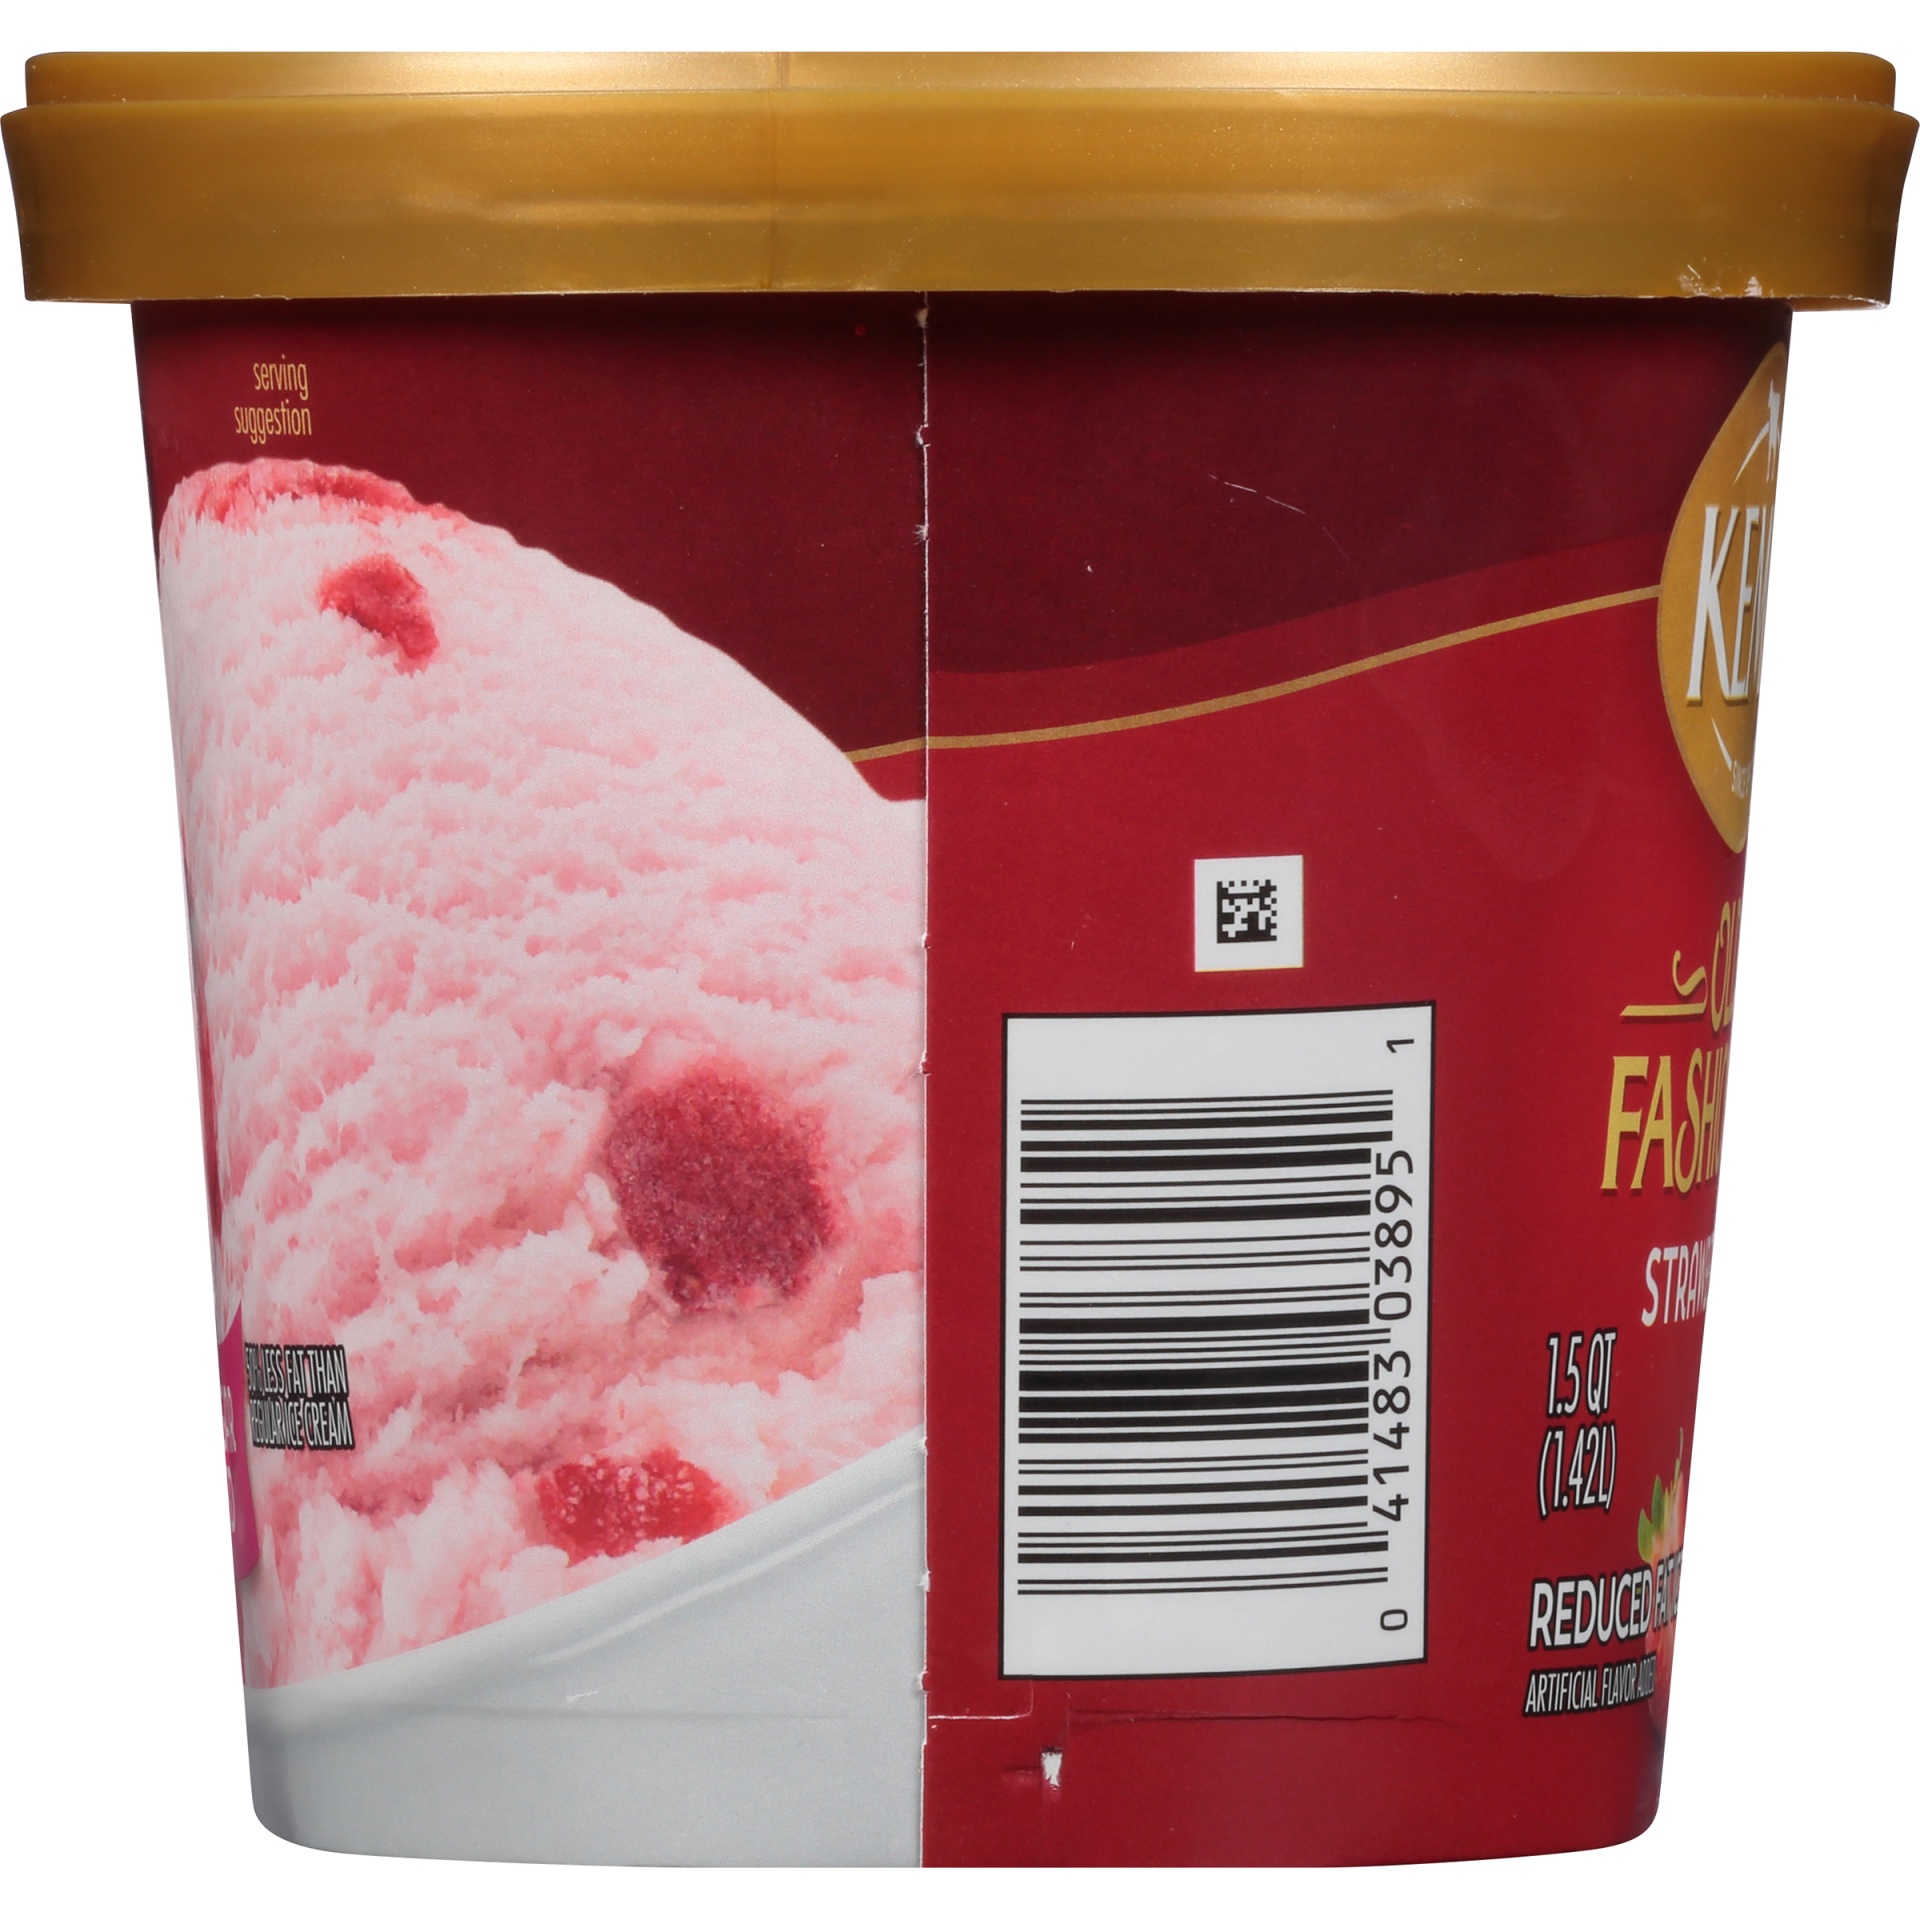 slide 4 of 8, Kemps No Sugar Added Old Fashioned Strawberry Reduced Fat Ice Cream, 1.5 qt